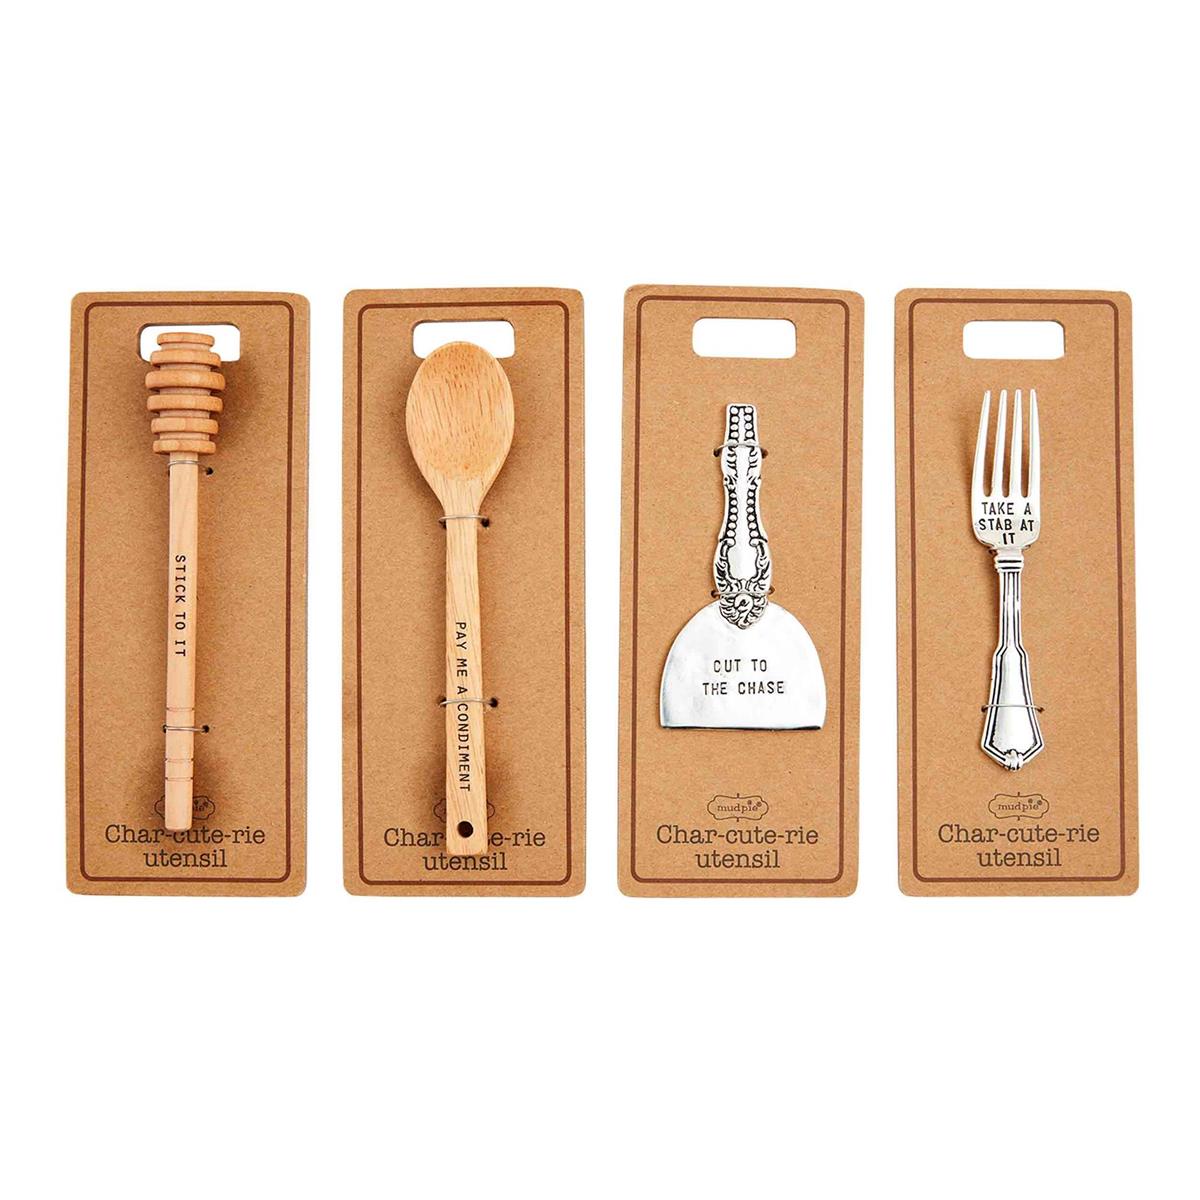 honey wand, wood spoon, cheese slicer, small fork displayed on card stock on a white background